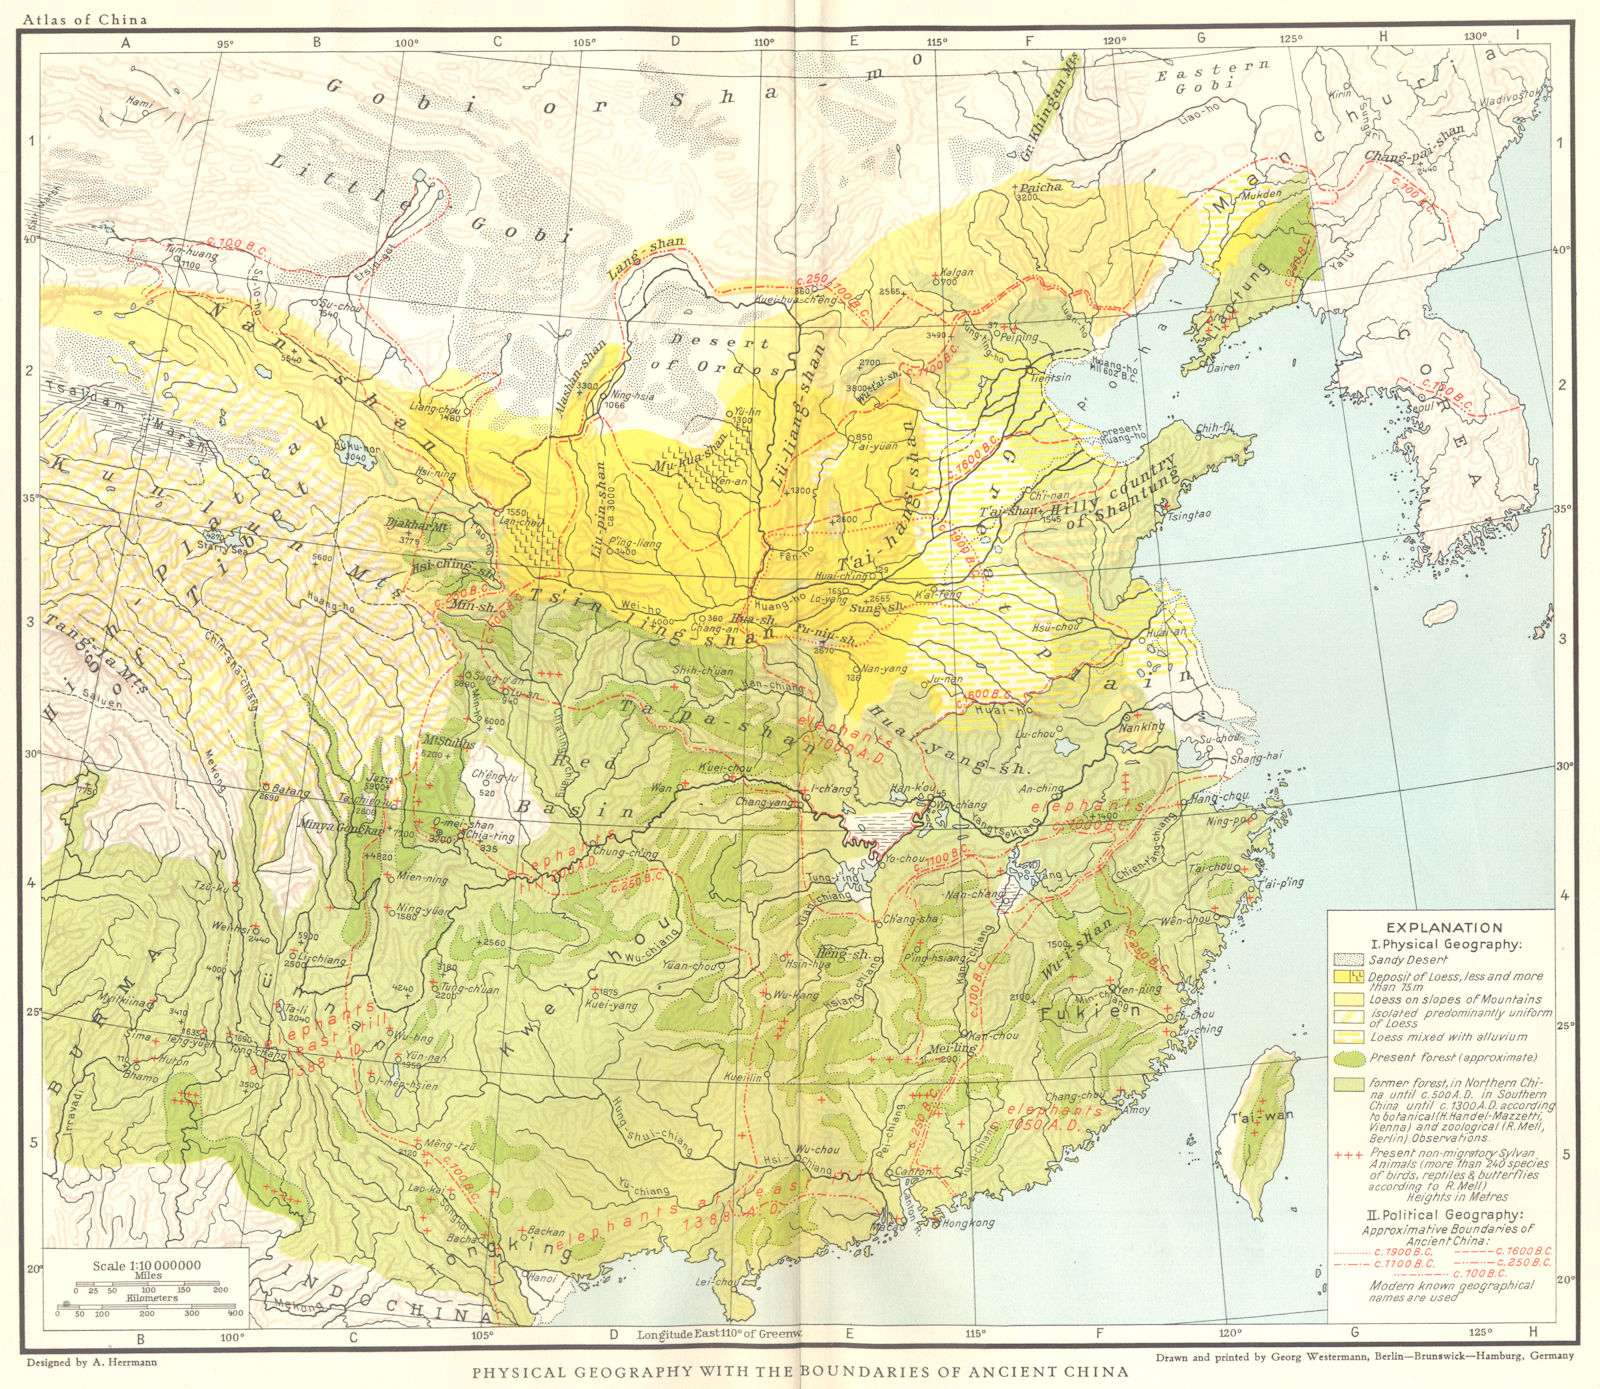 Associate Product Physical Geography & boundaries of Ancient China. Range of Elephants 1935 map